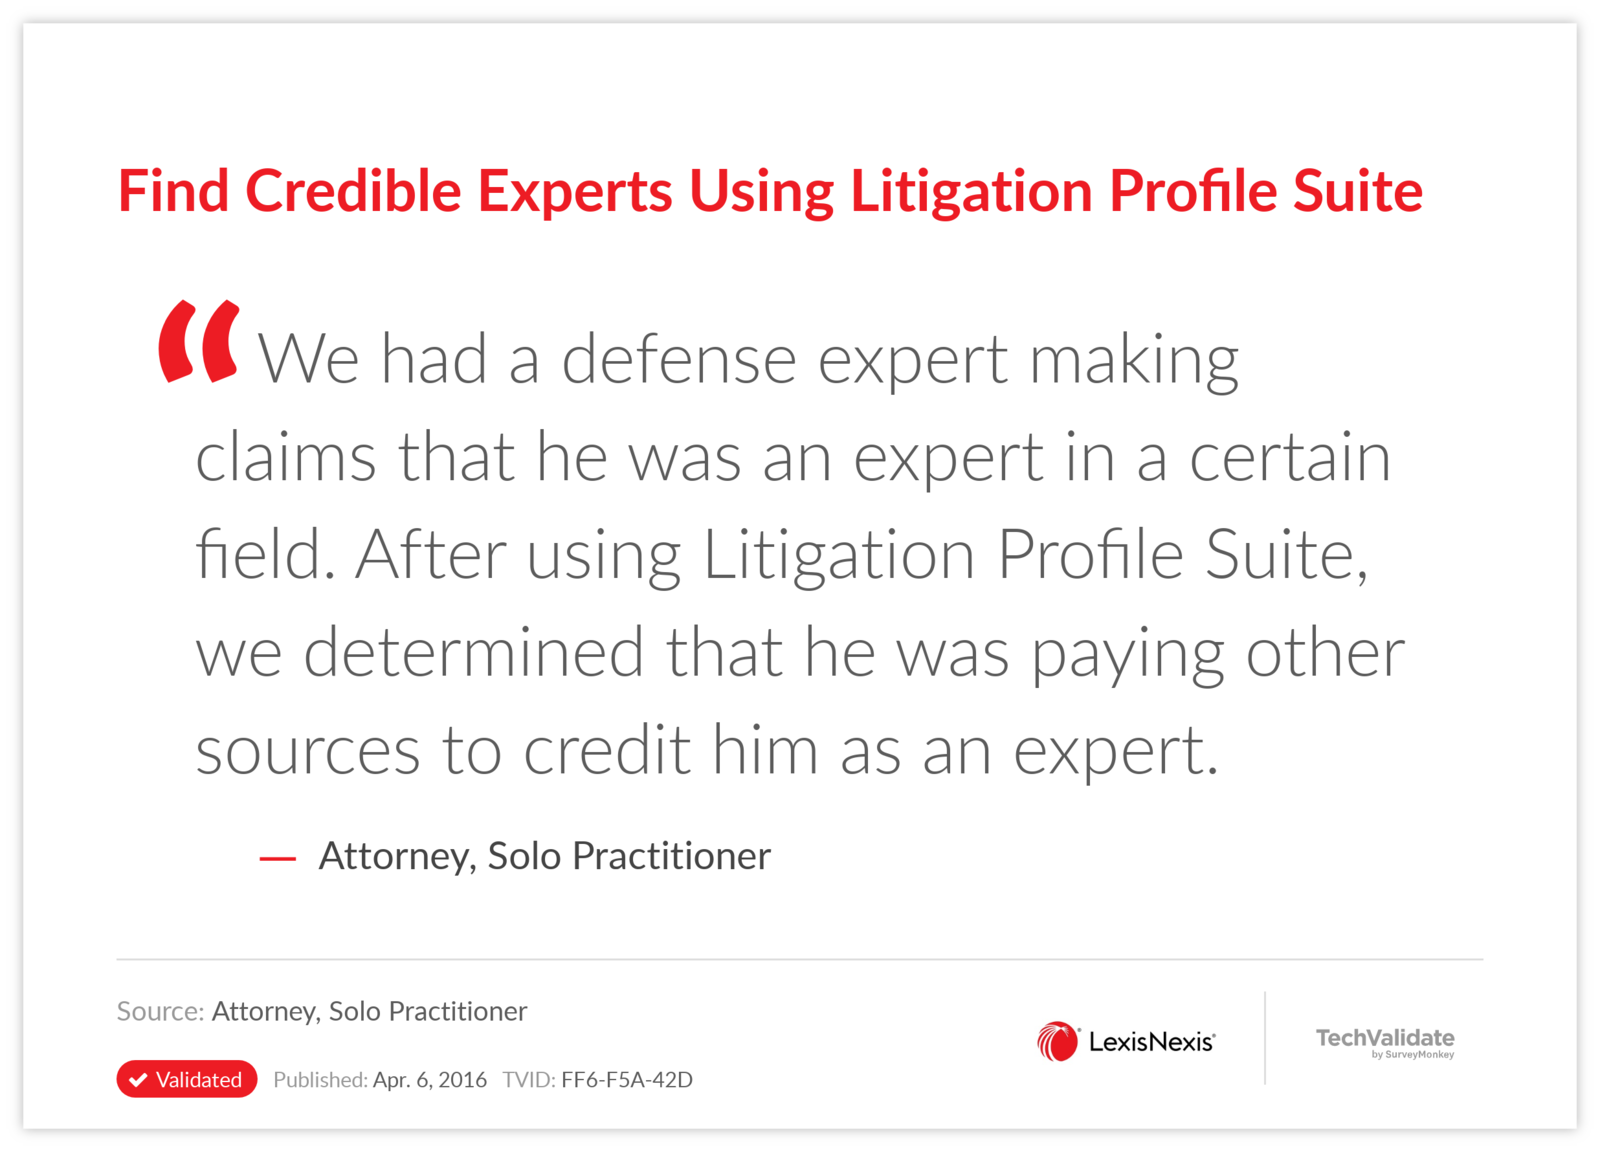 Find Credible Experts Using Litigation Profile Suite